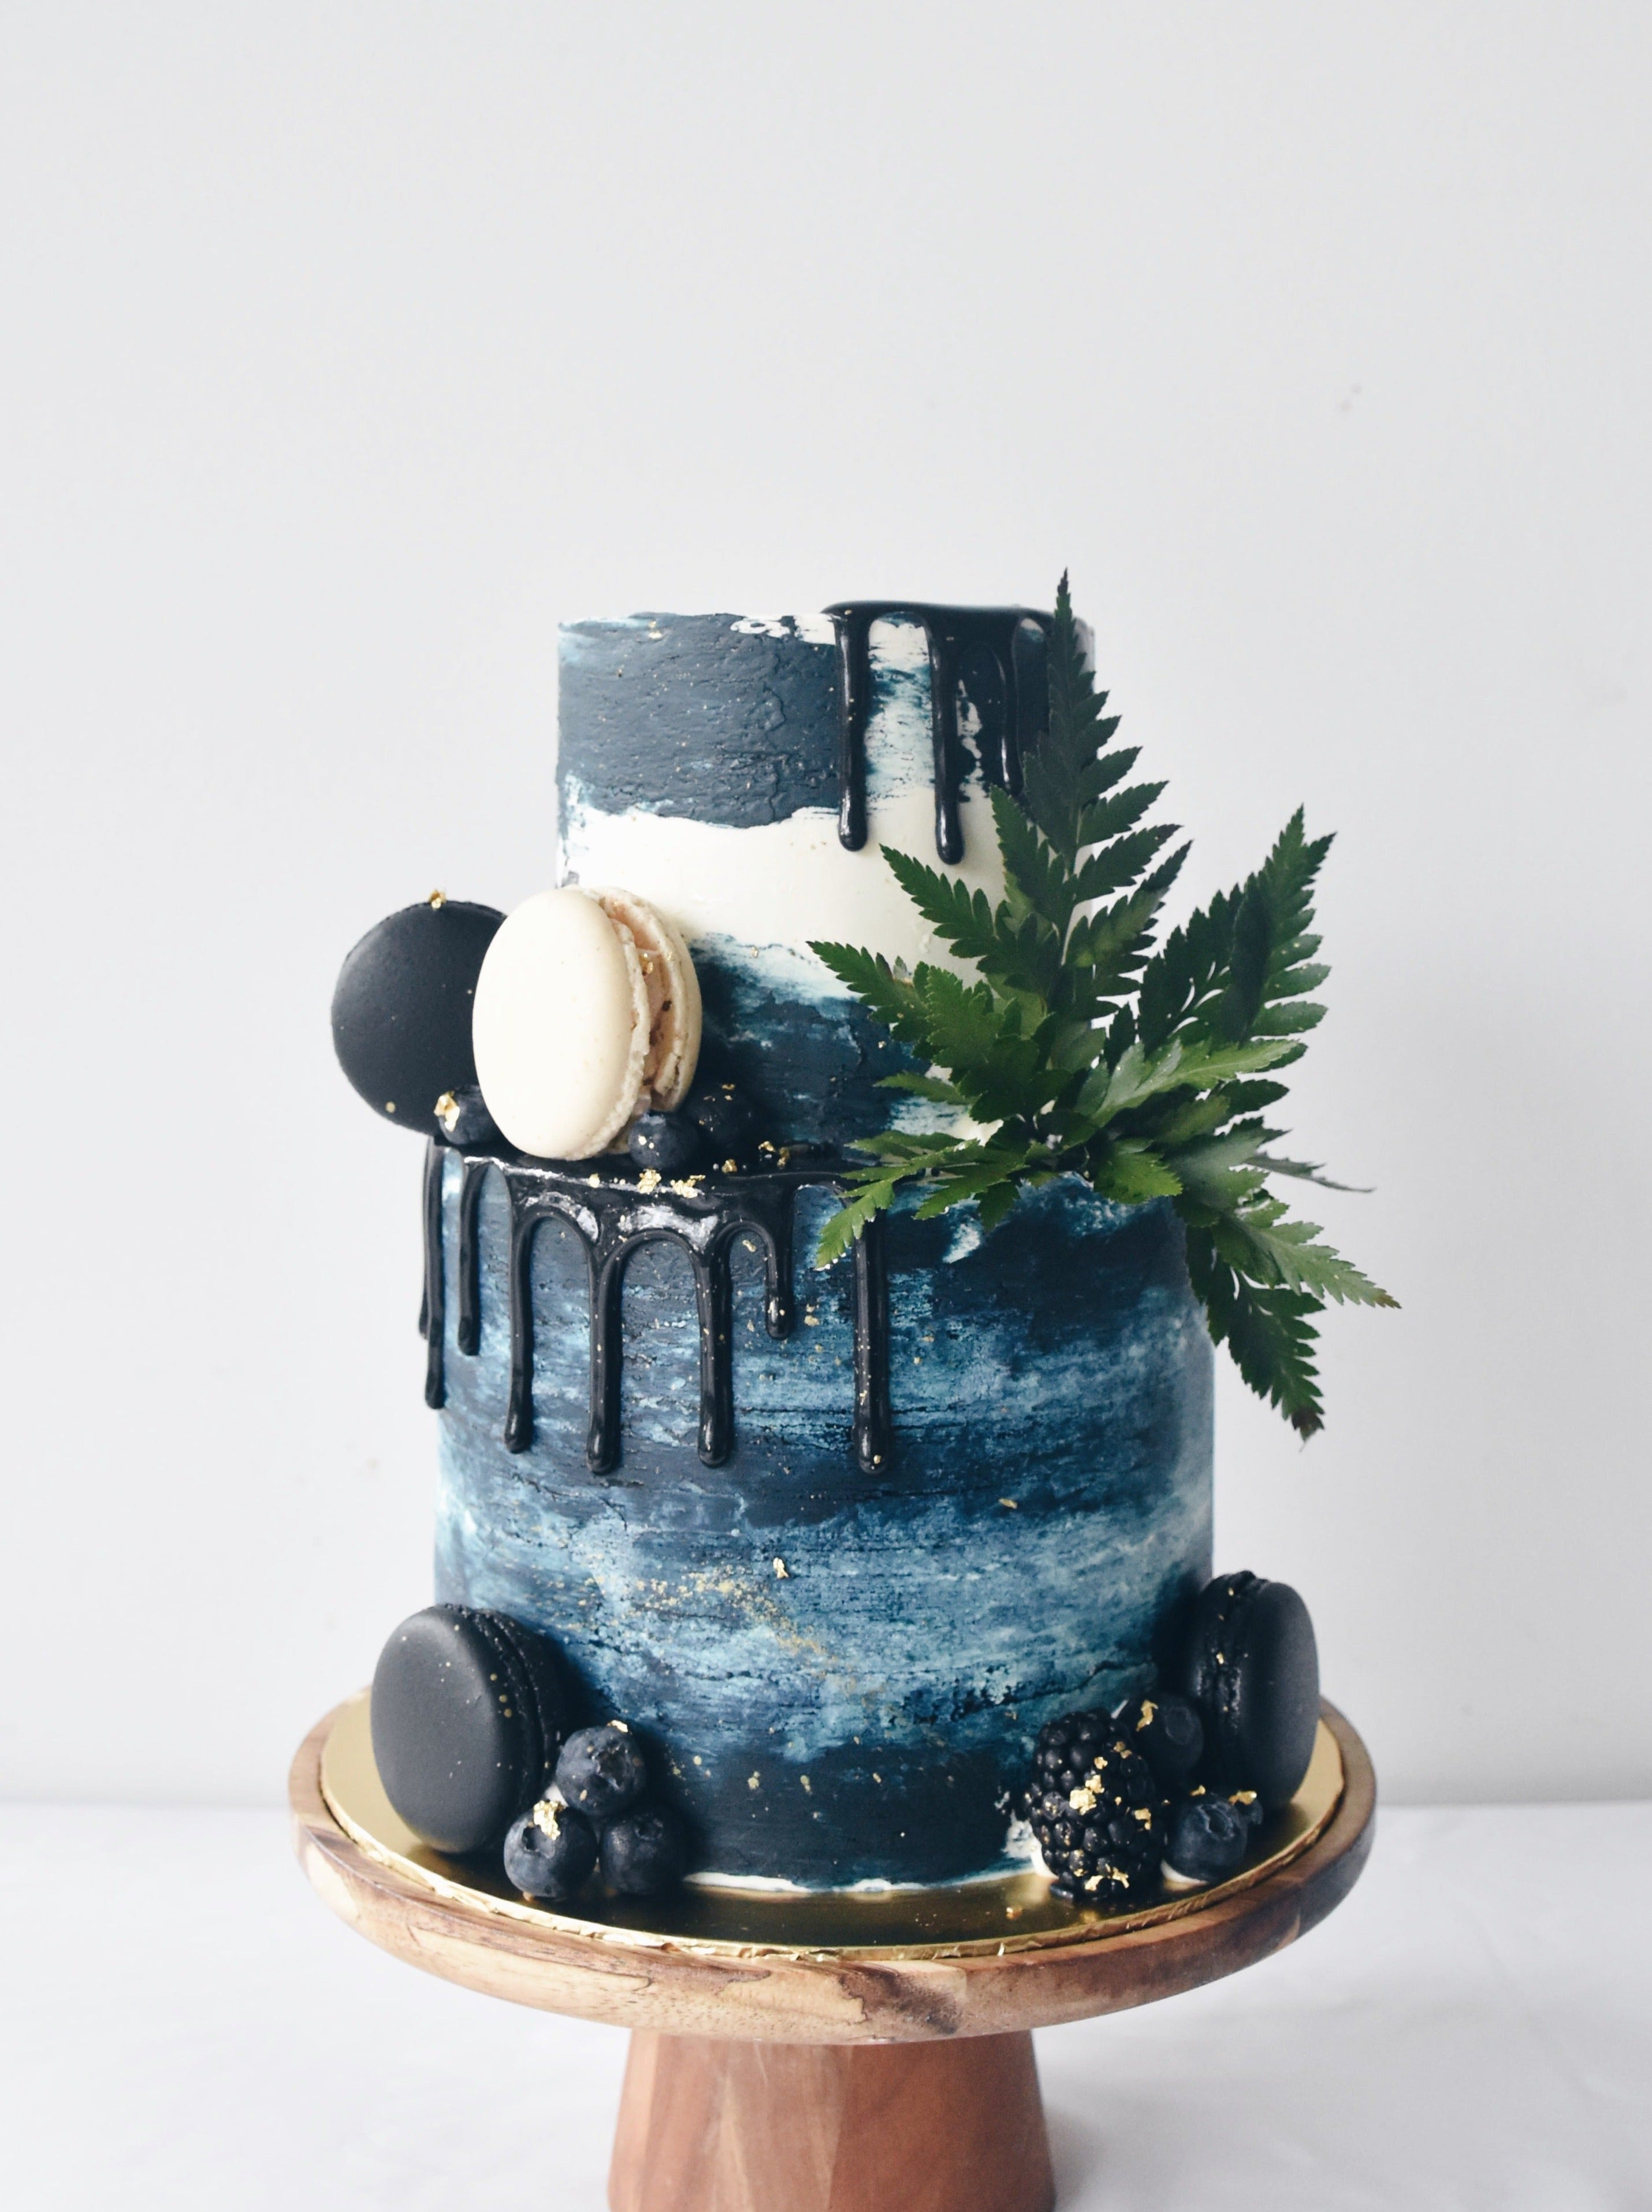 How to Make Navy Blue Buttercream Easily with Exact Dye Quantities